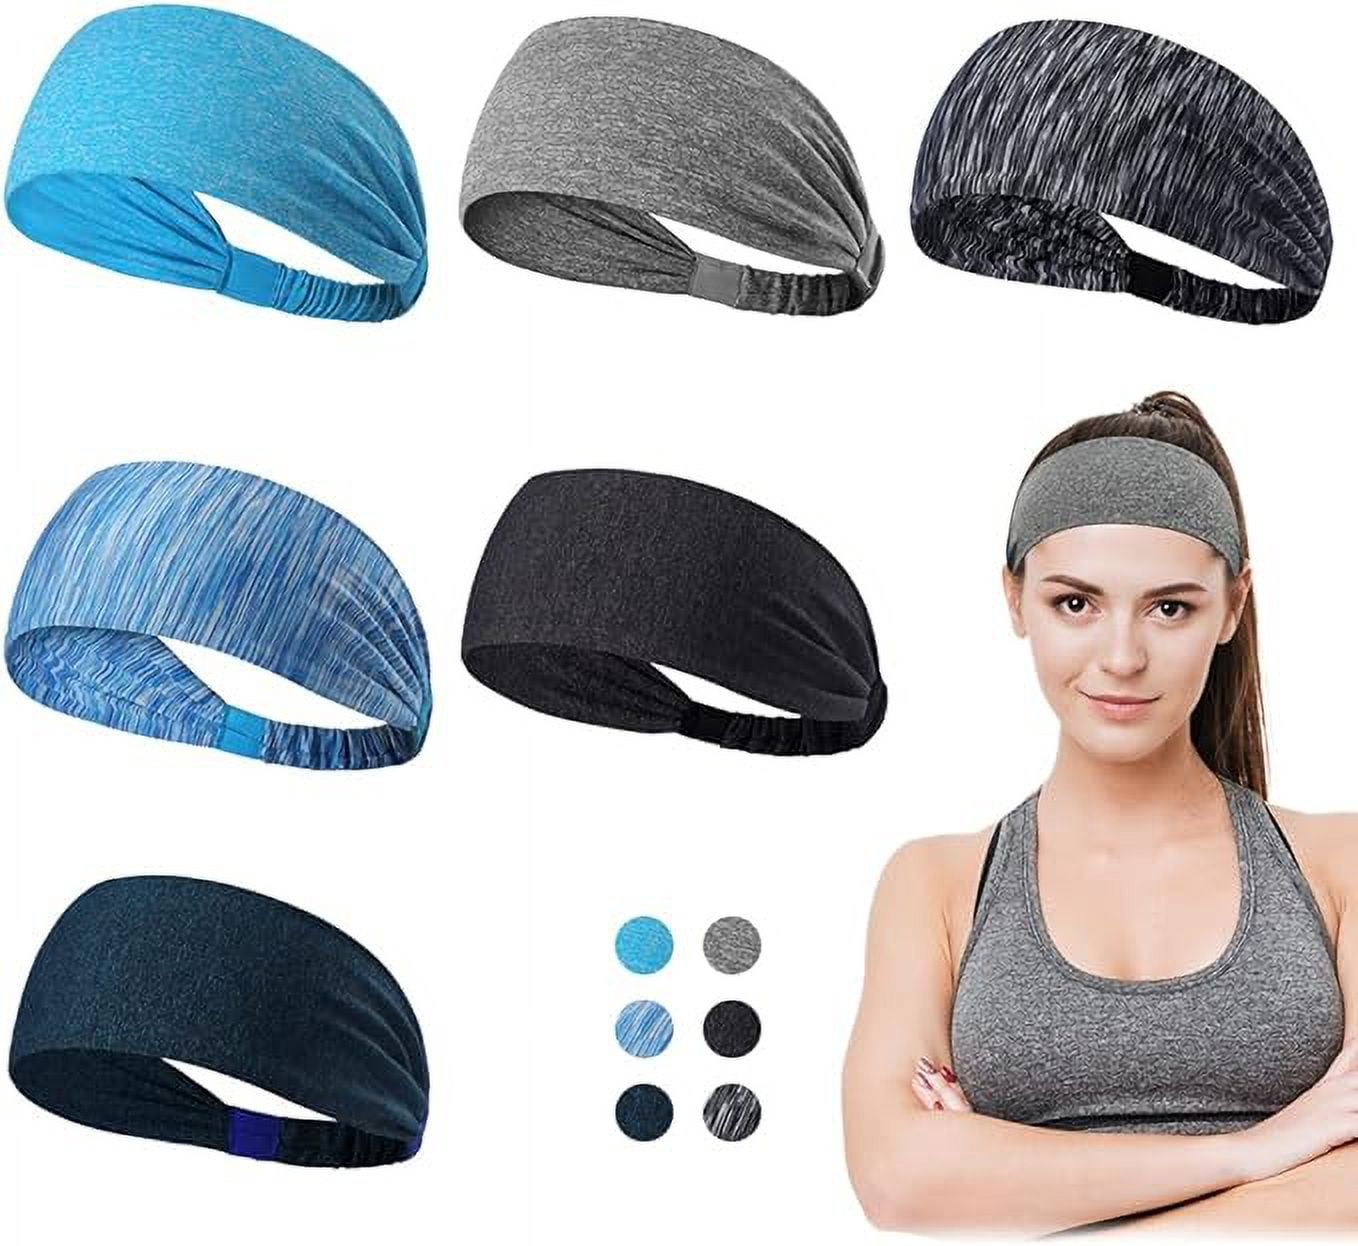 Dreamlover Workout Headbands for Women, Sweatbands for Women, Yoga Headbands  for Women Athletic, Sports Headbands for Exercise, 6 Pieces 